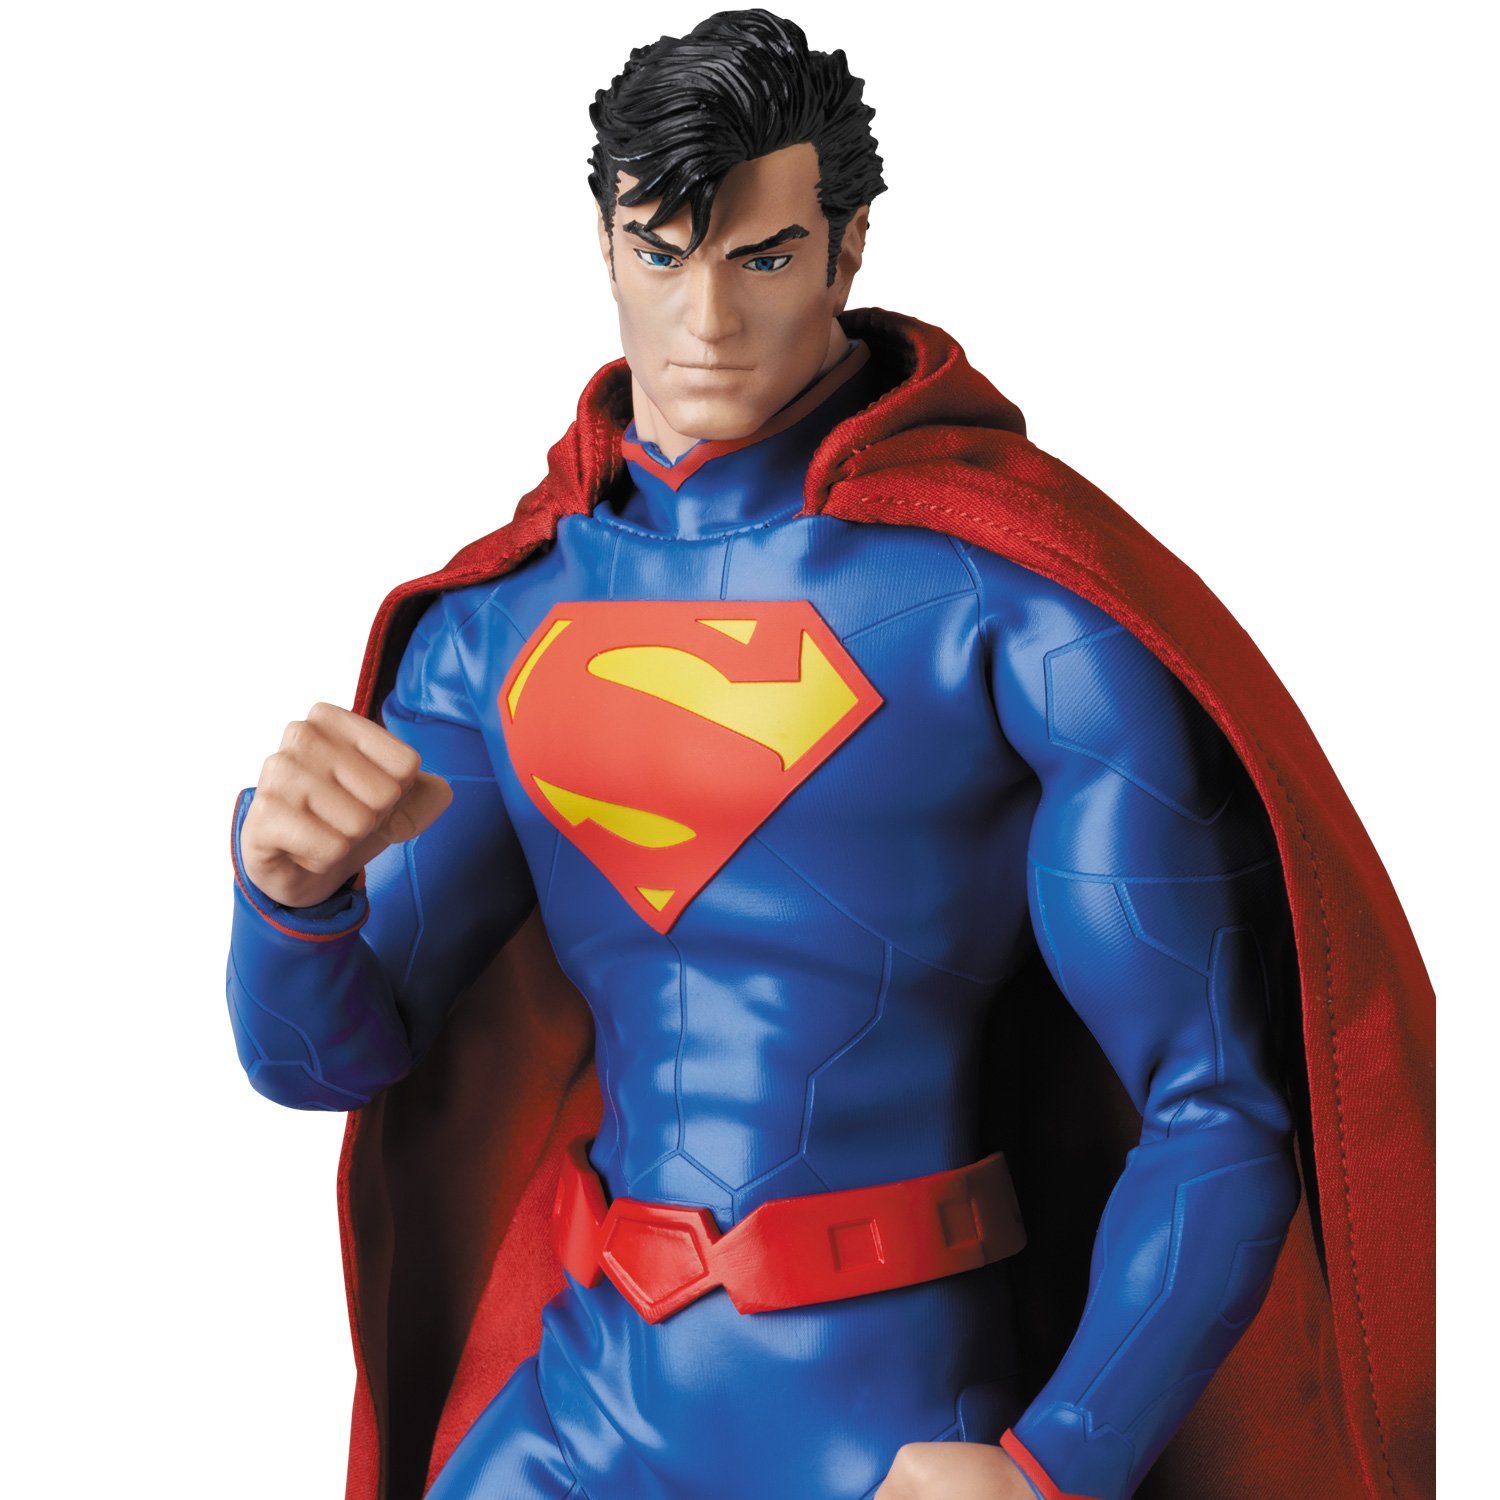 MEDICOM RAH Real Action Heroes Justice League Superman The 52 Version Figure for sale online 